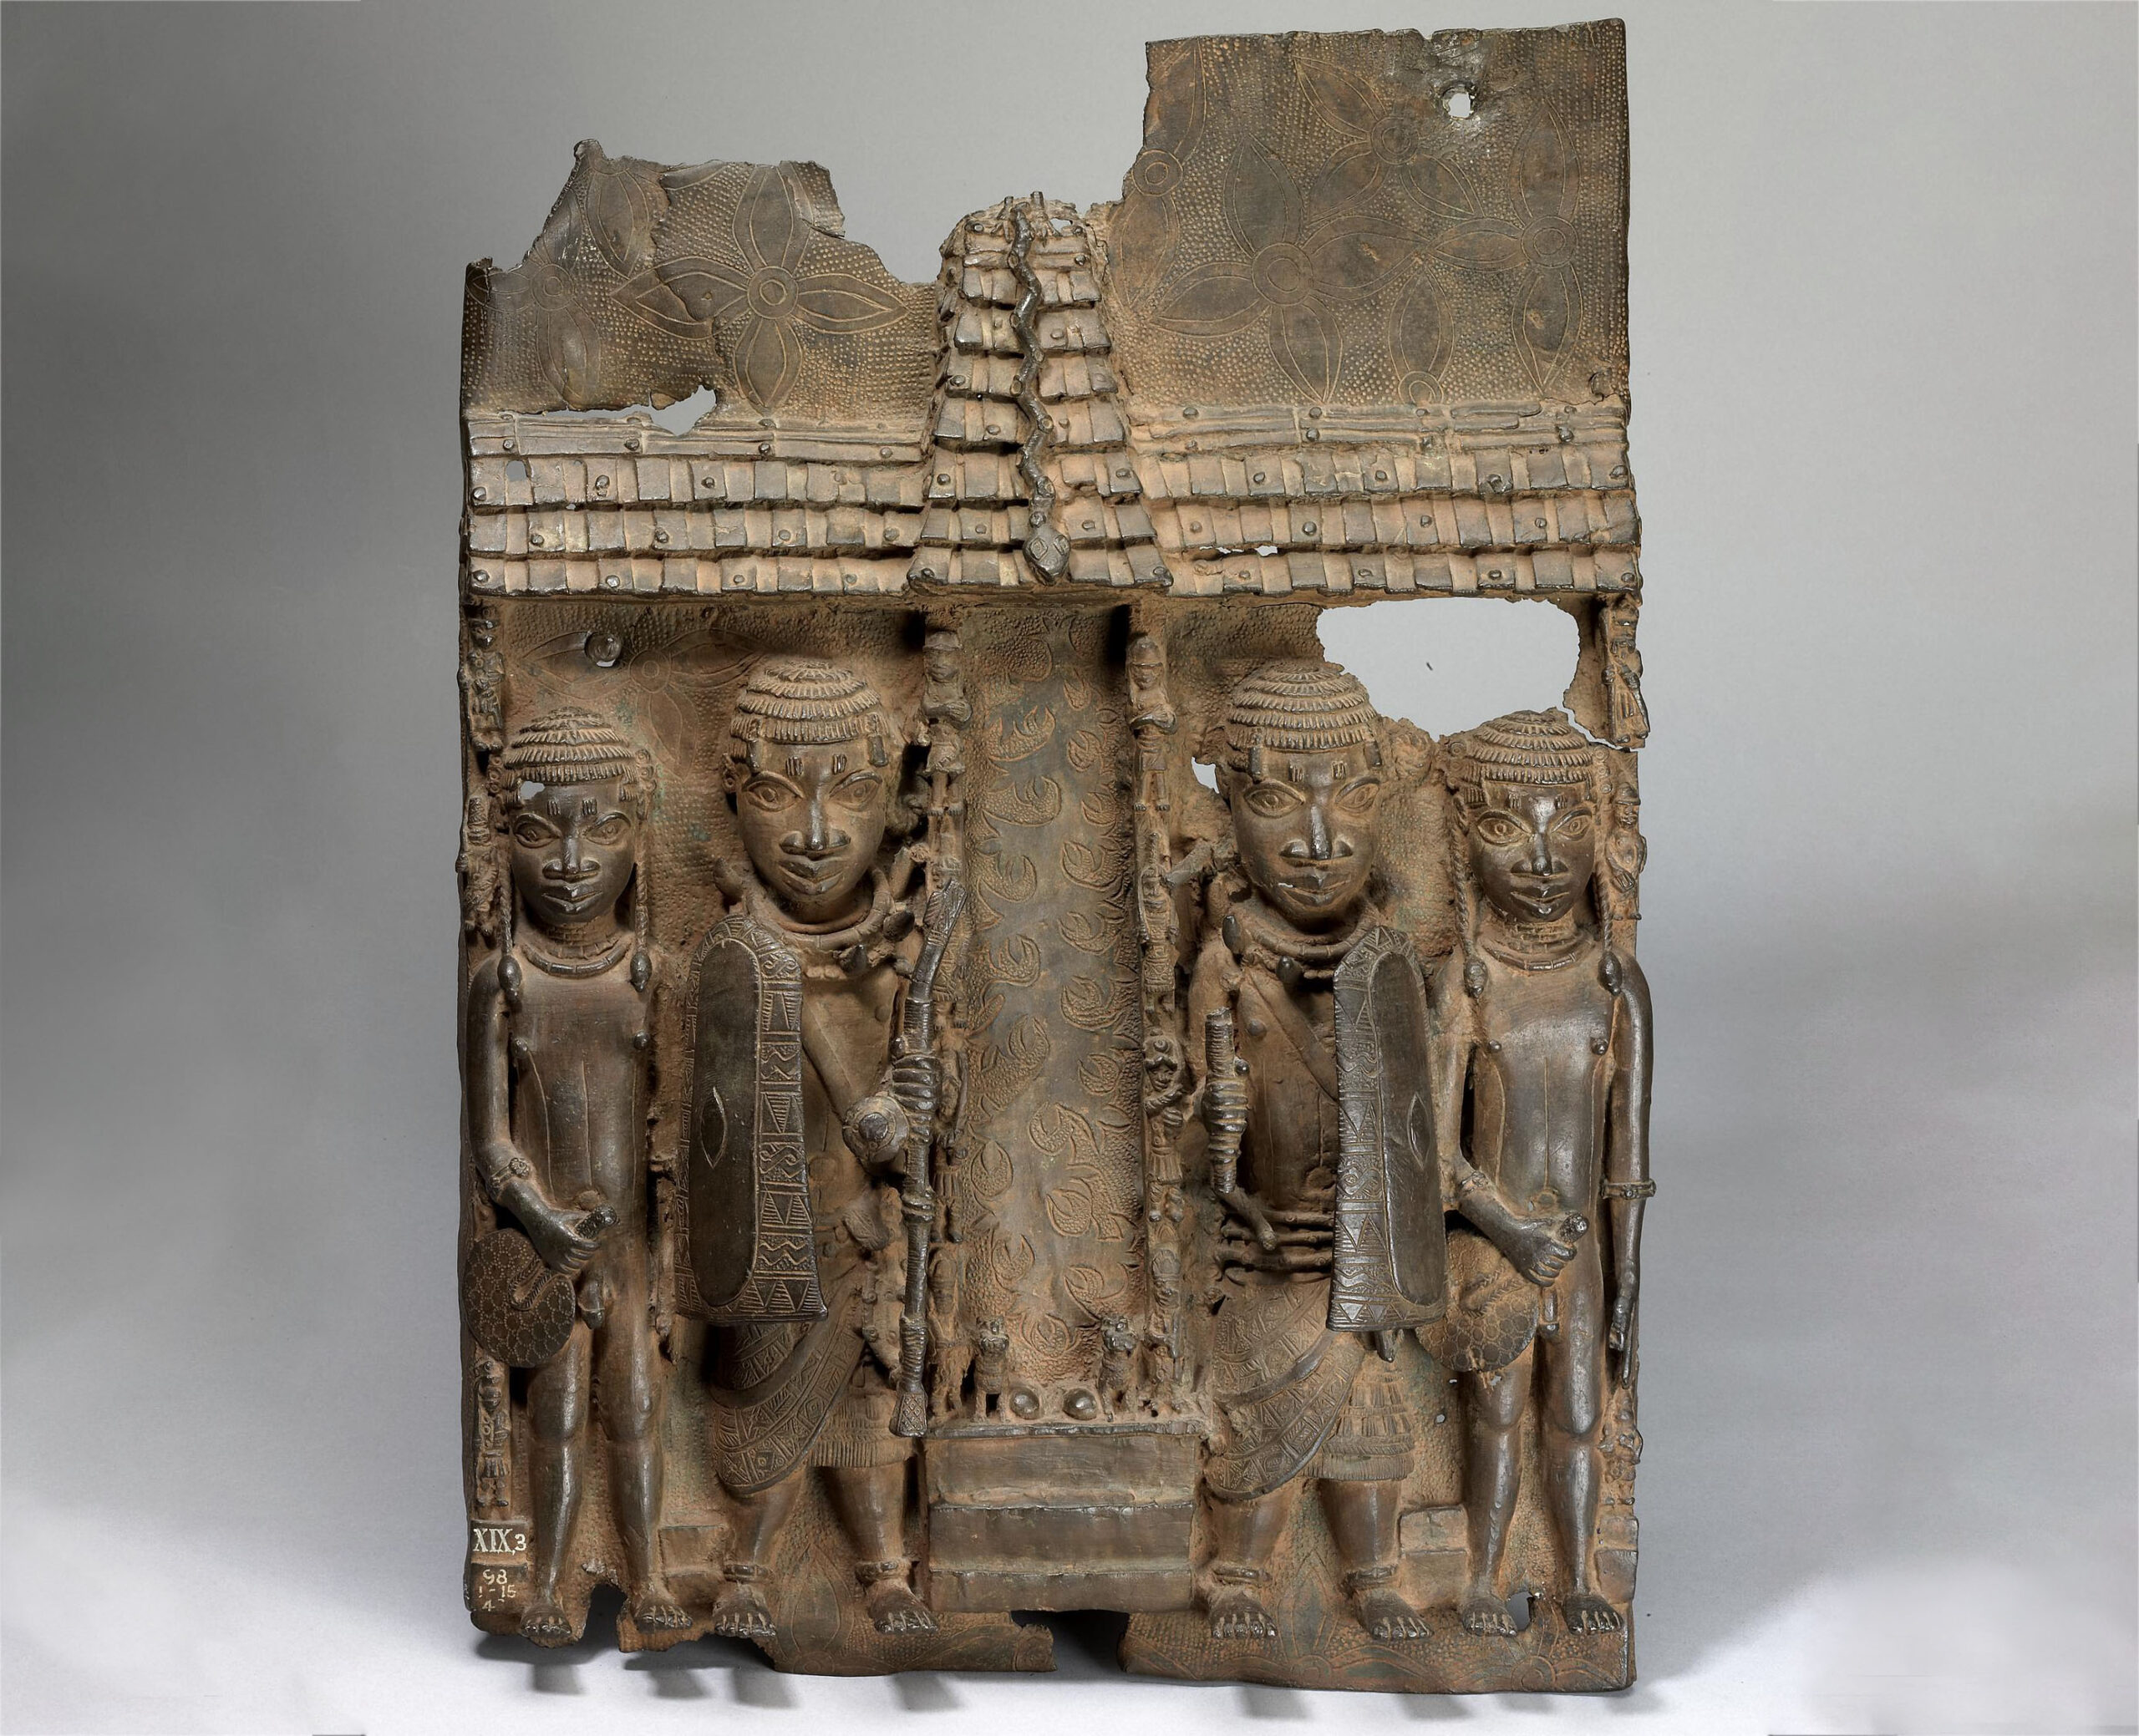 The Benin “Bronzes”: a story of violence, theft, and artistry